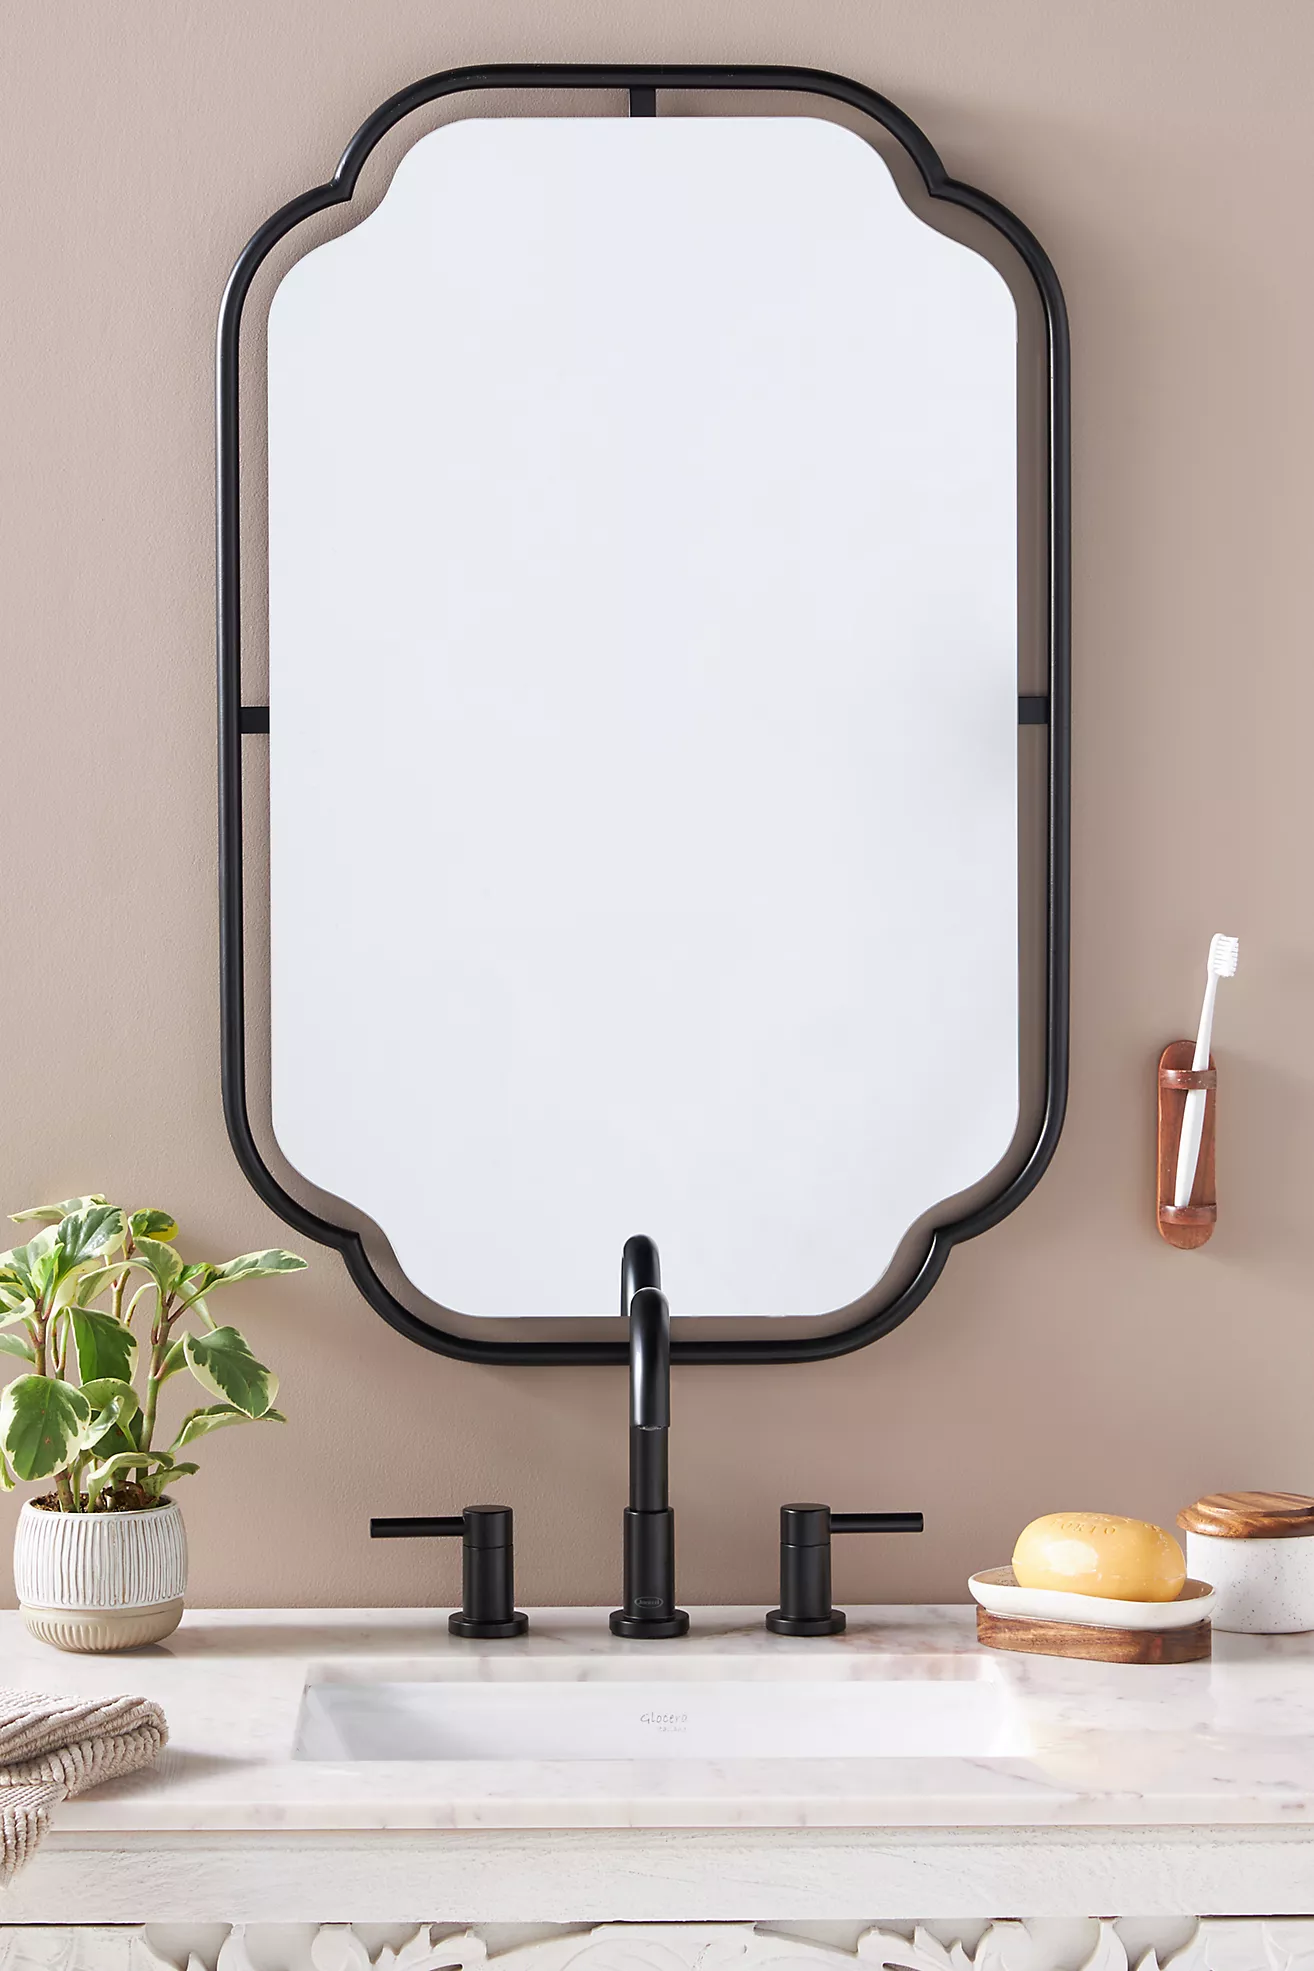 Modernize with an Art Deco Inspired Mirror